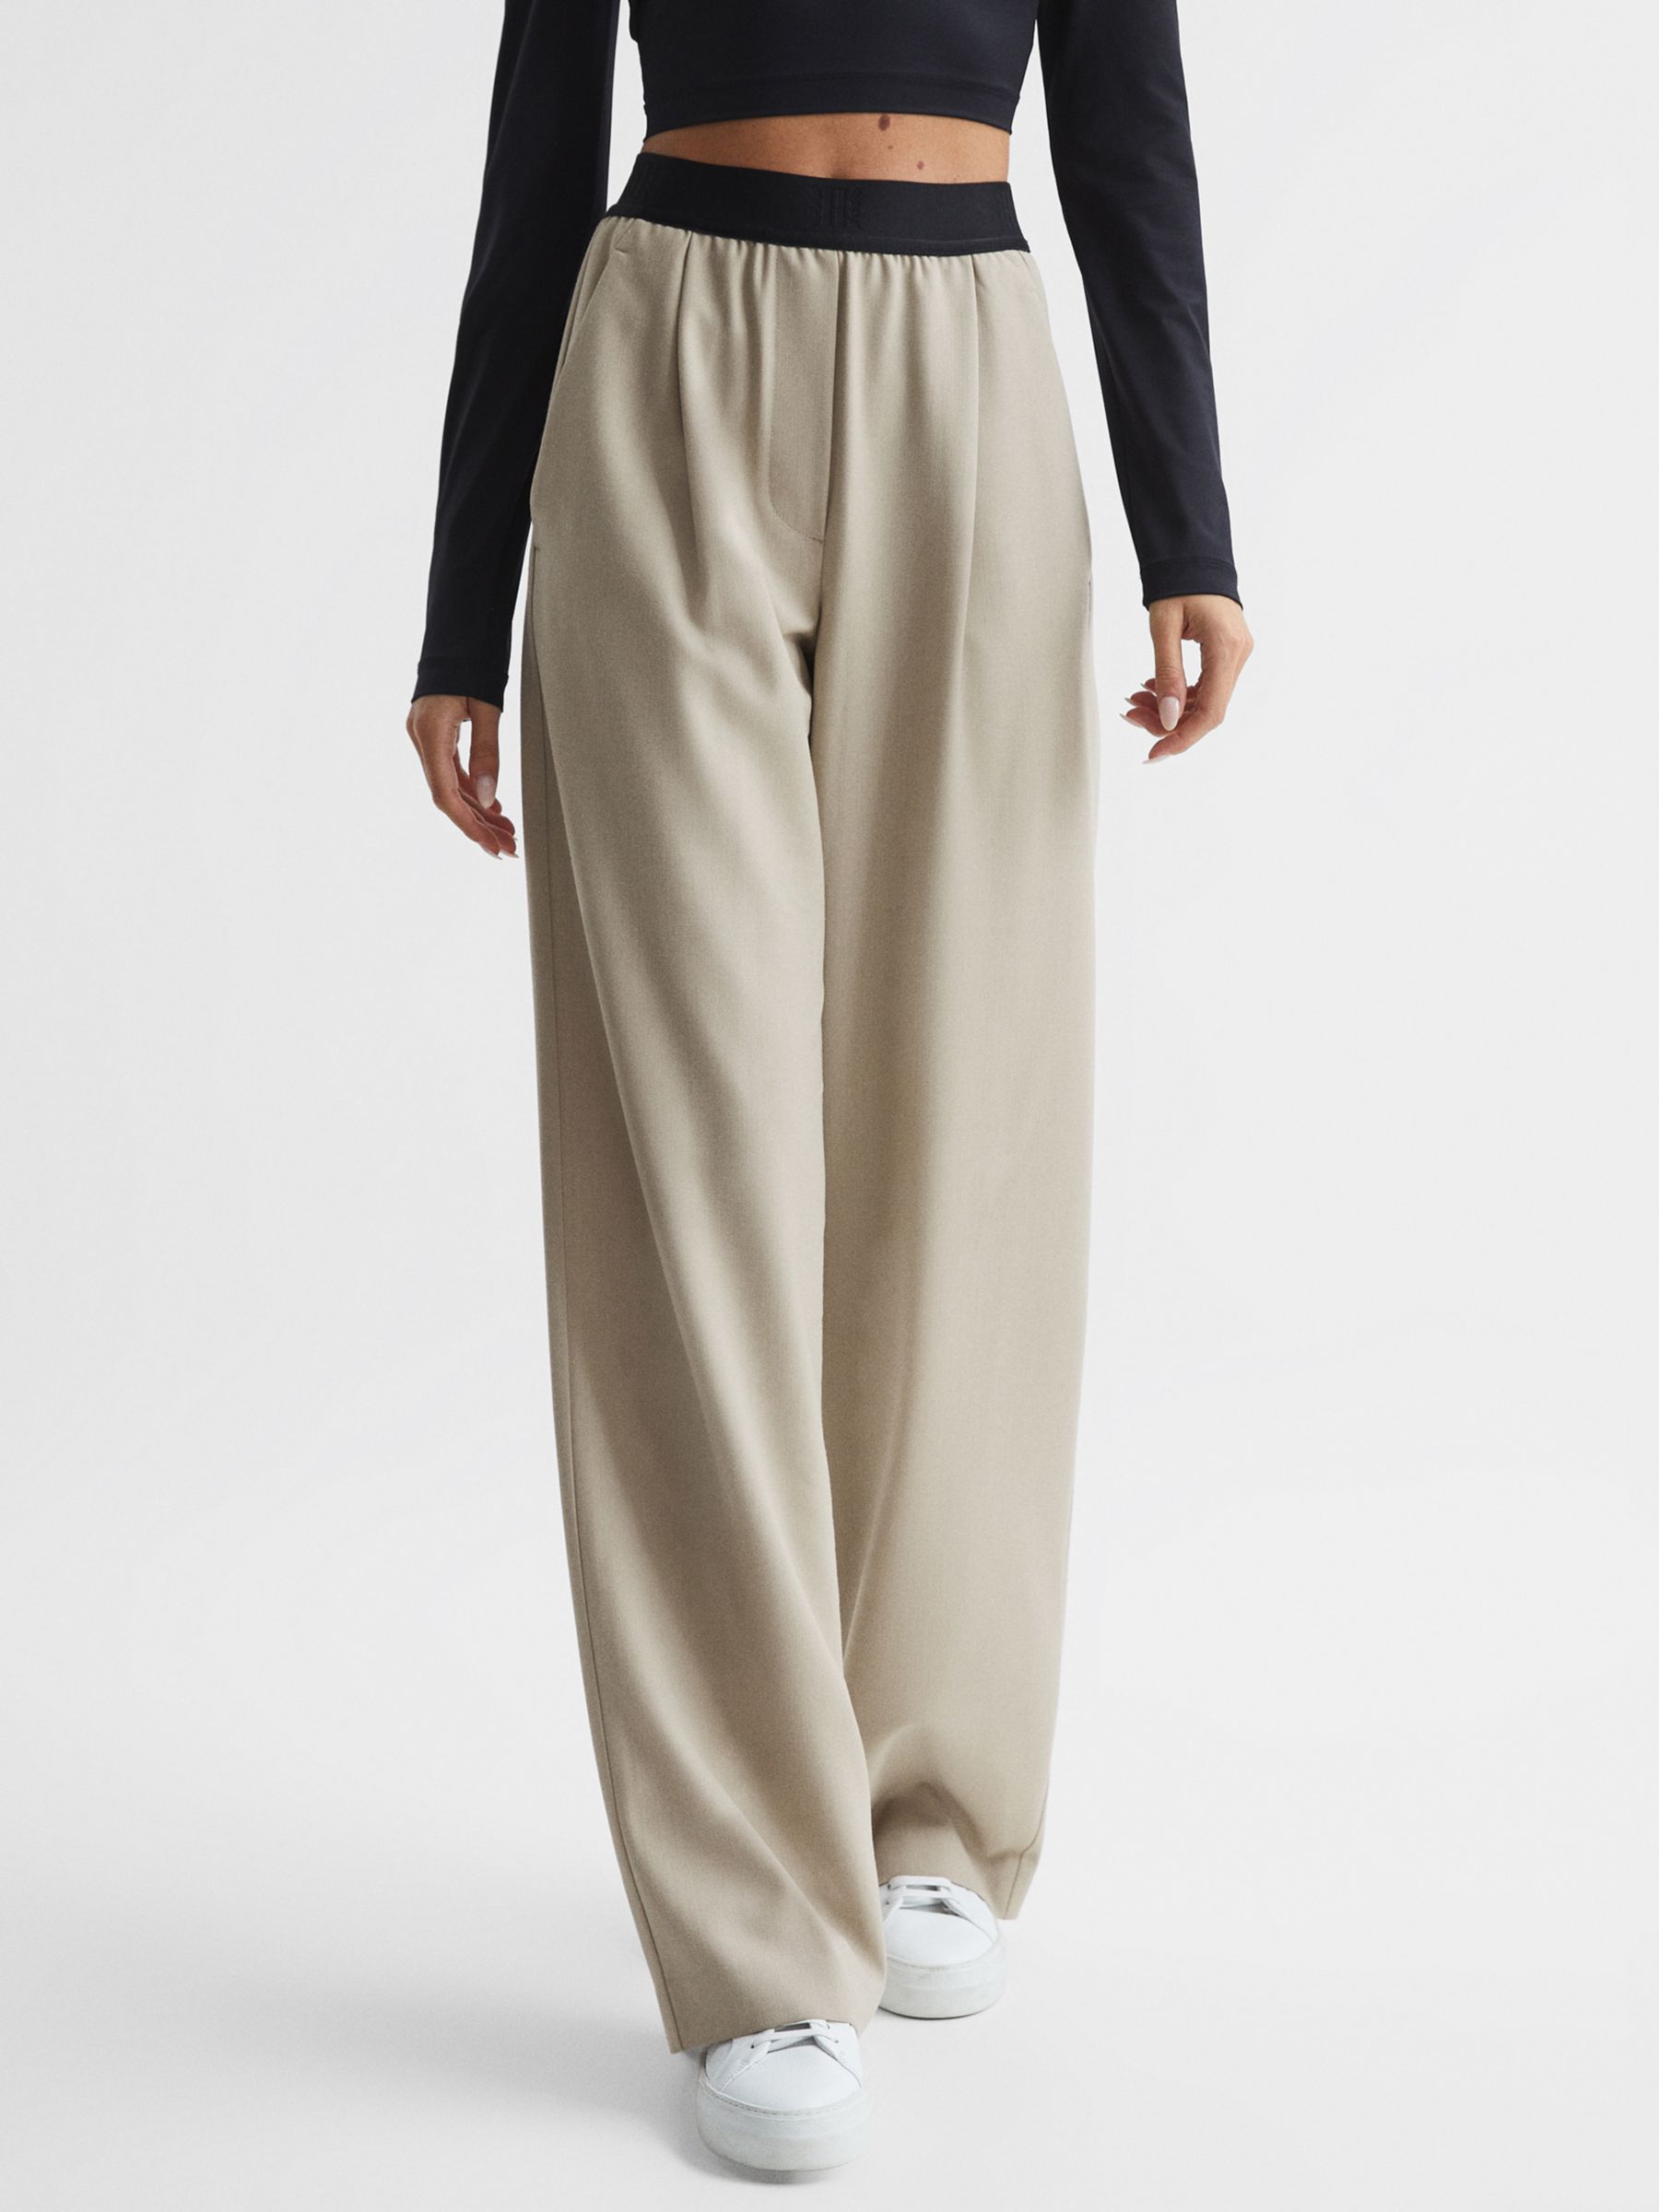 Reiss Lena Wool Blend Pull On Wide Leg Trousers, Stone at John Lewis ...